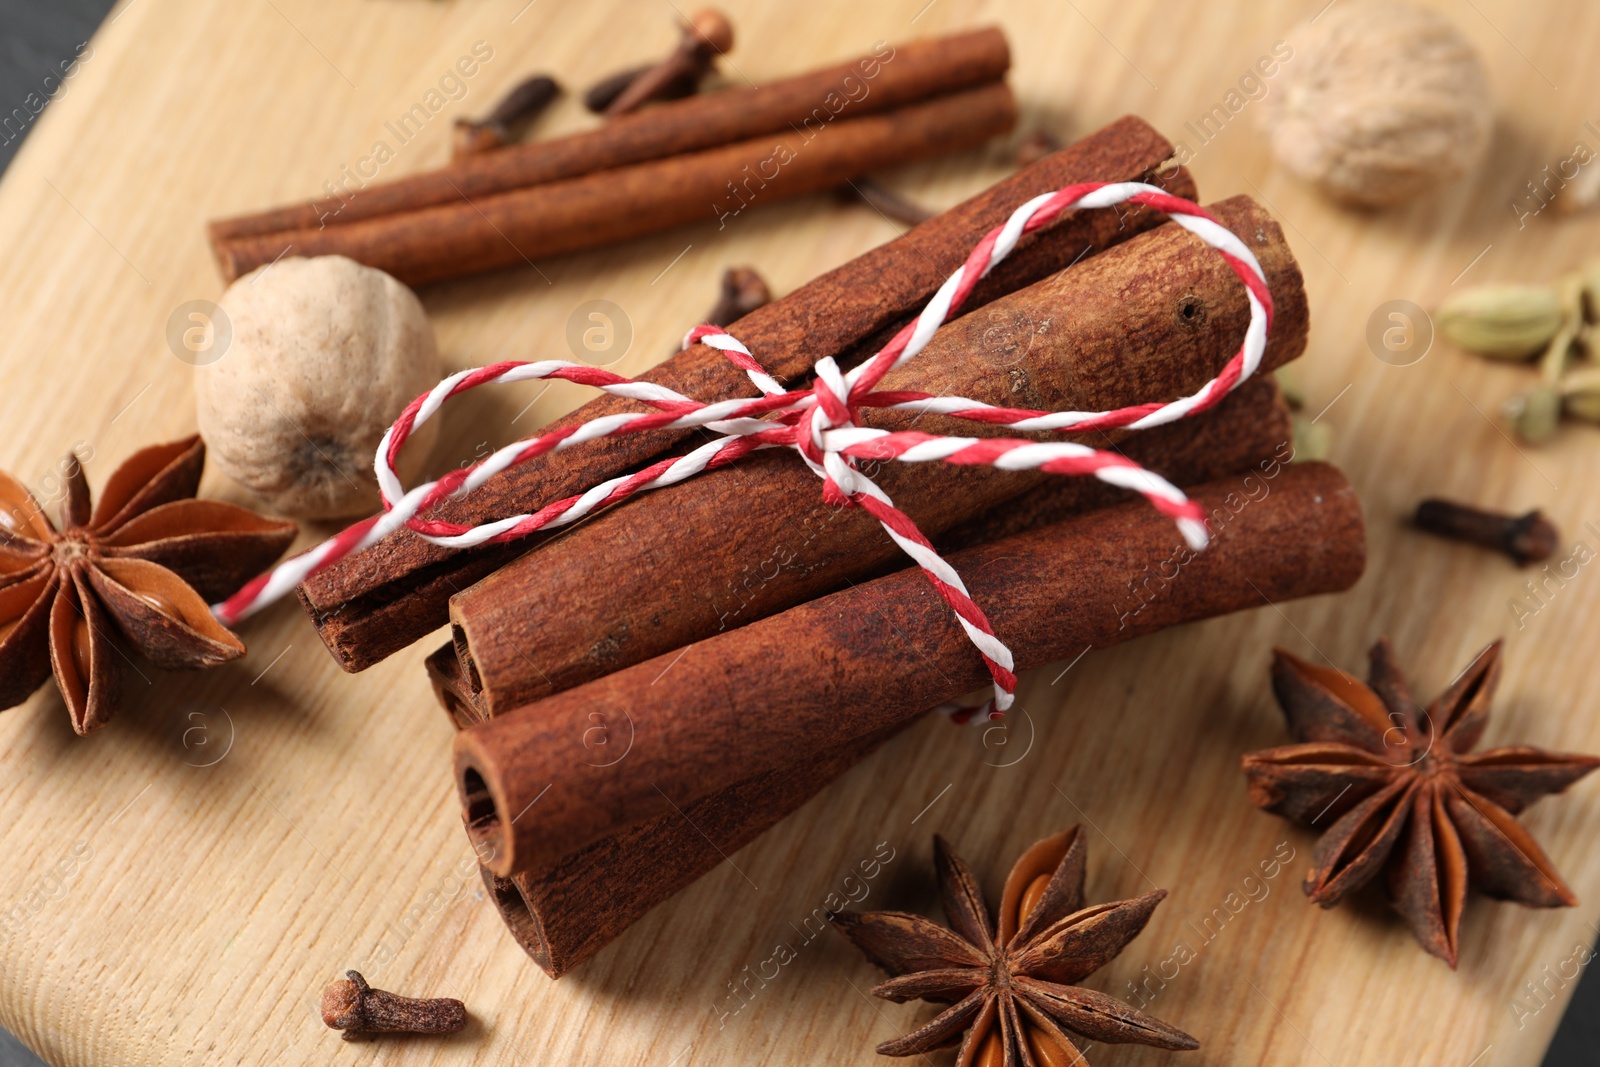 Photo of Cinnamon sticks and other spices on wooden board, closeup